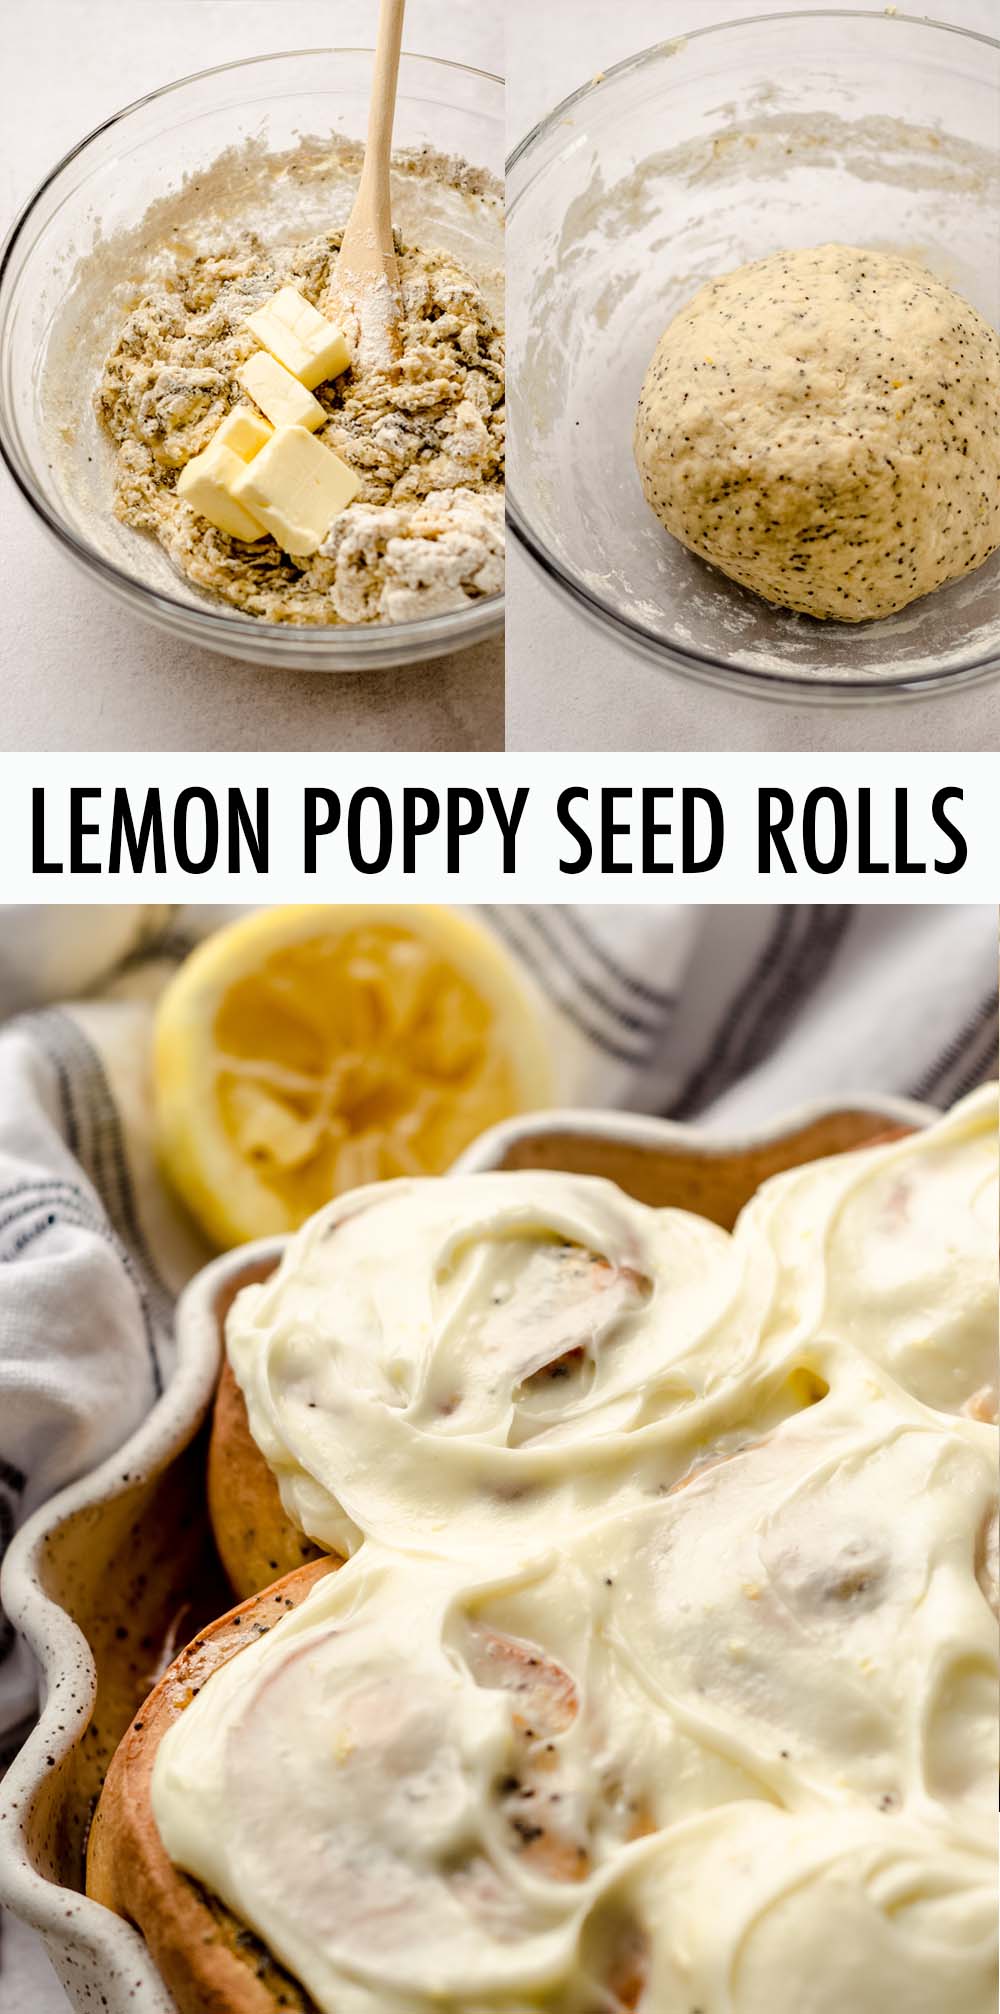 Sweet and tart yeasted lemon poppy seed rolls filled with a buttery sweetened lemon poppy seed filling and topped with a tangy cream cheese frosting. via @frshaprilflours